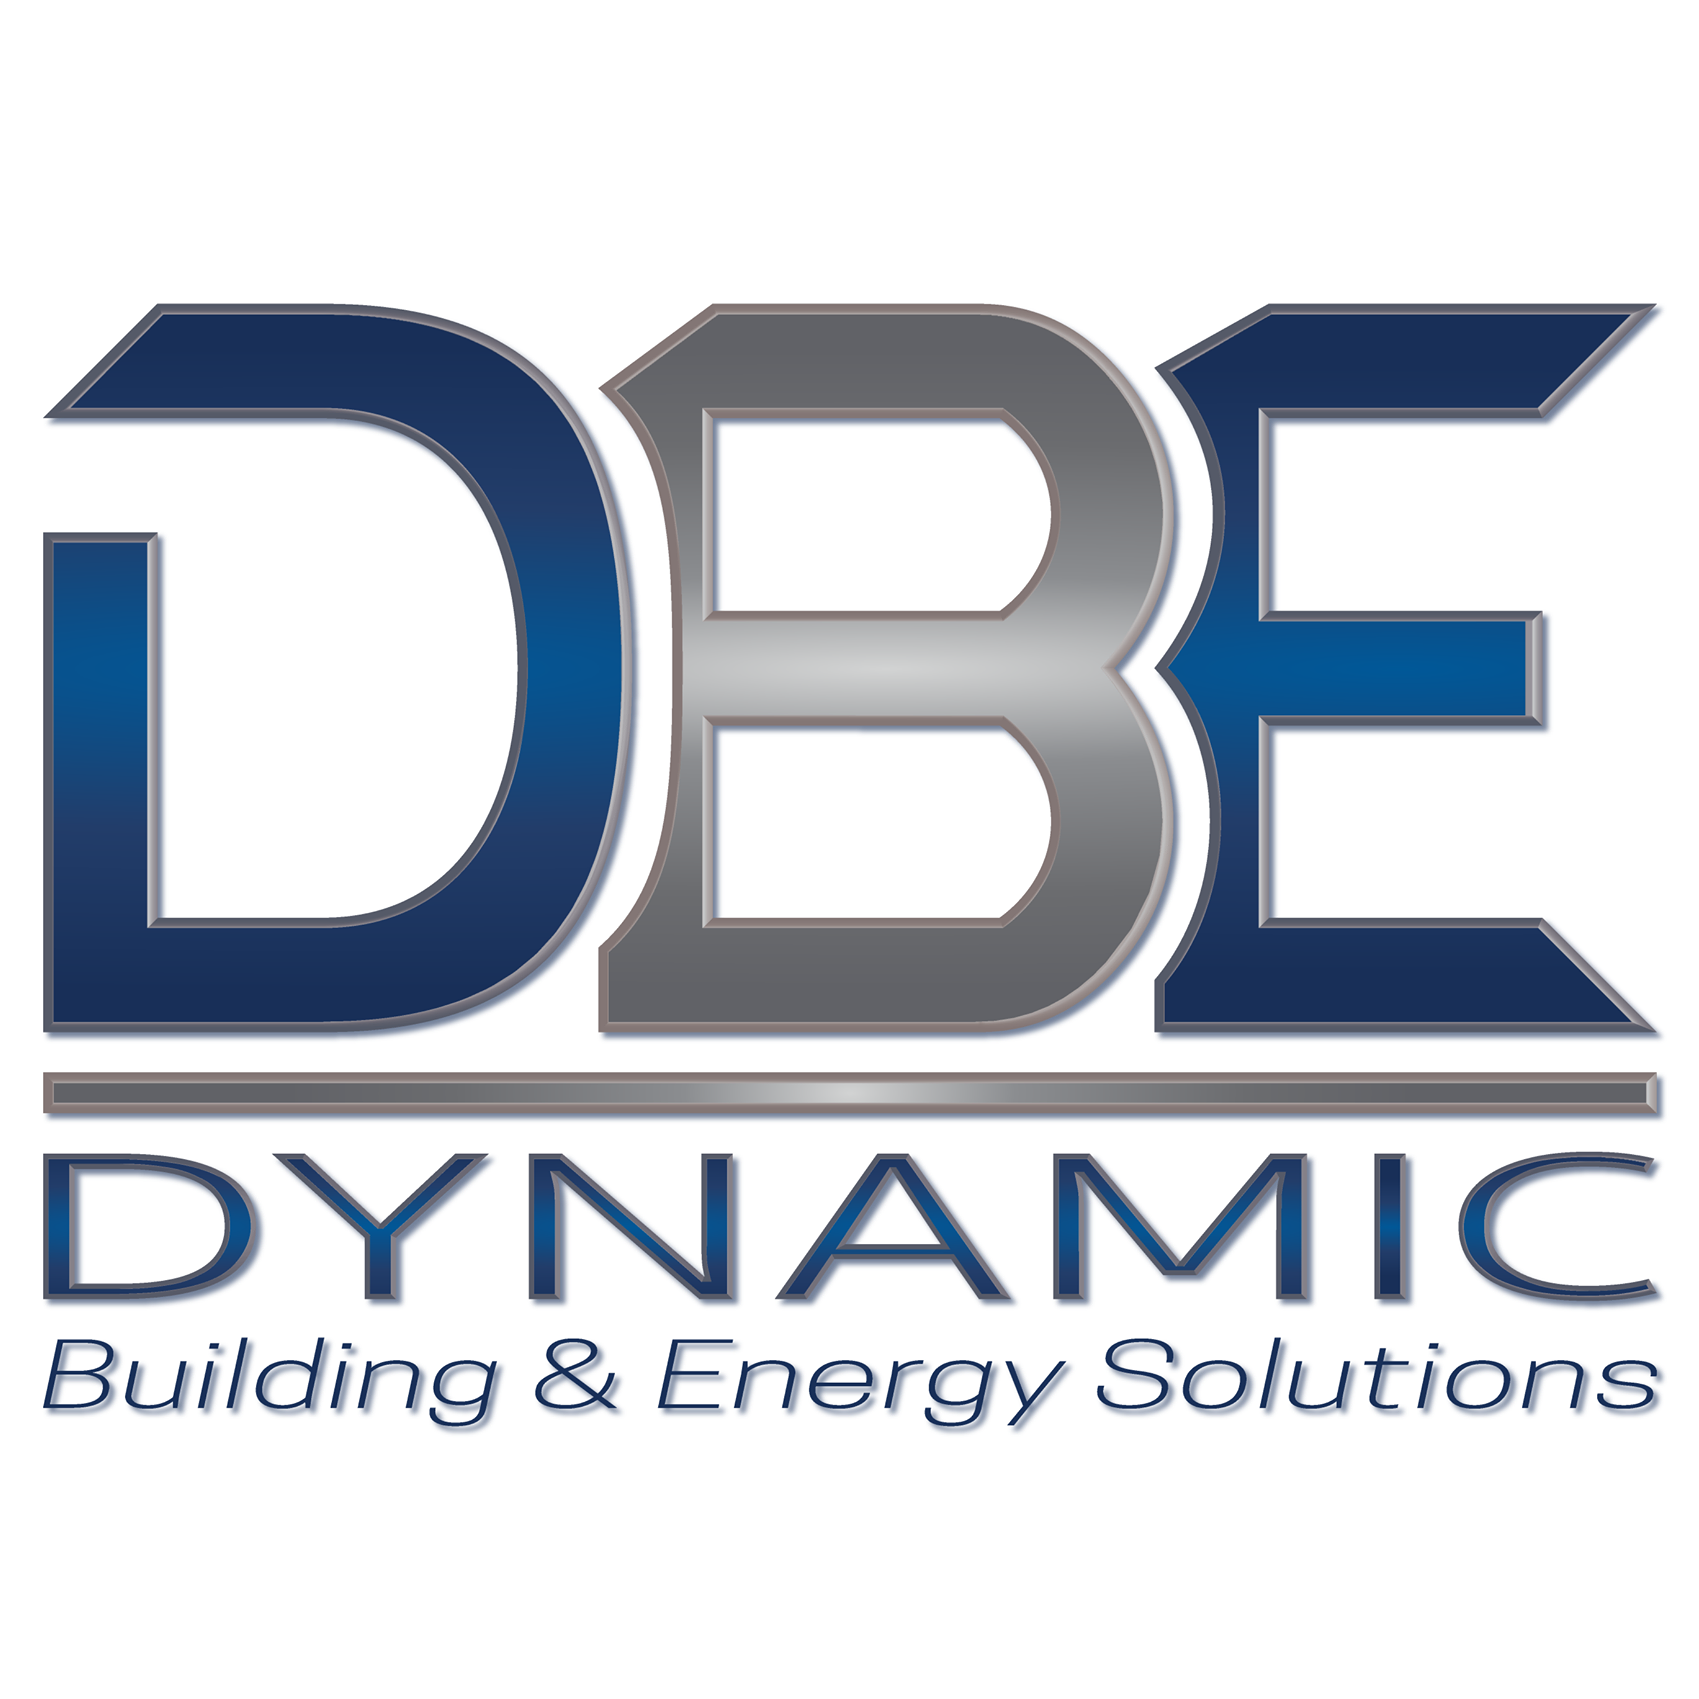 Dynamic Building & Energy Solutions 183 Providence-New London Turnpike #1721, North Stonington Connecticut 06359